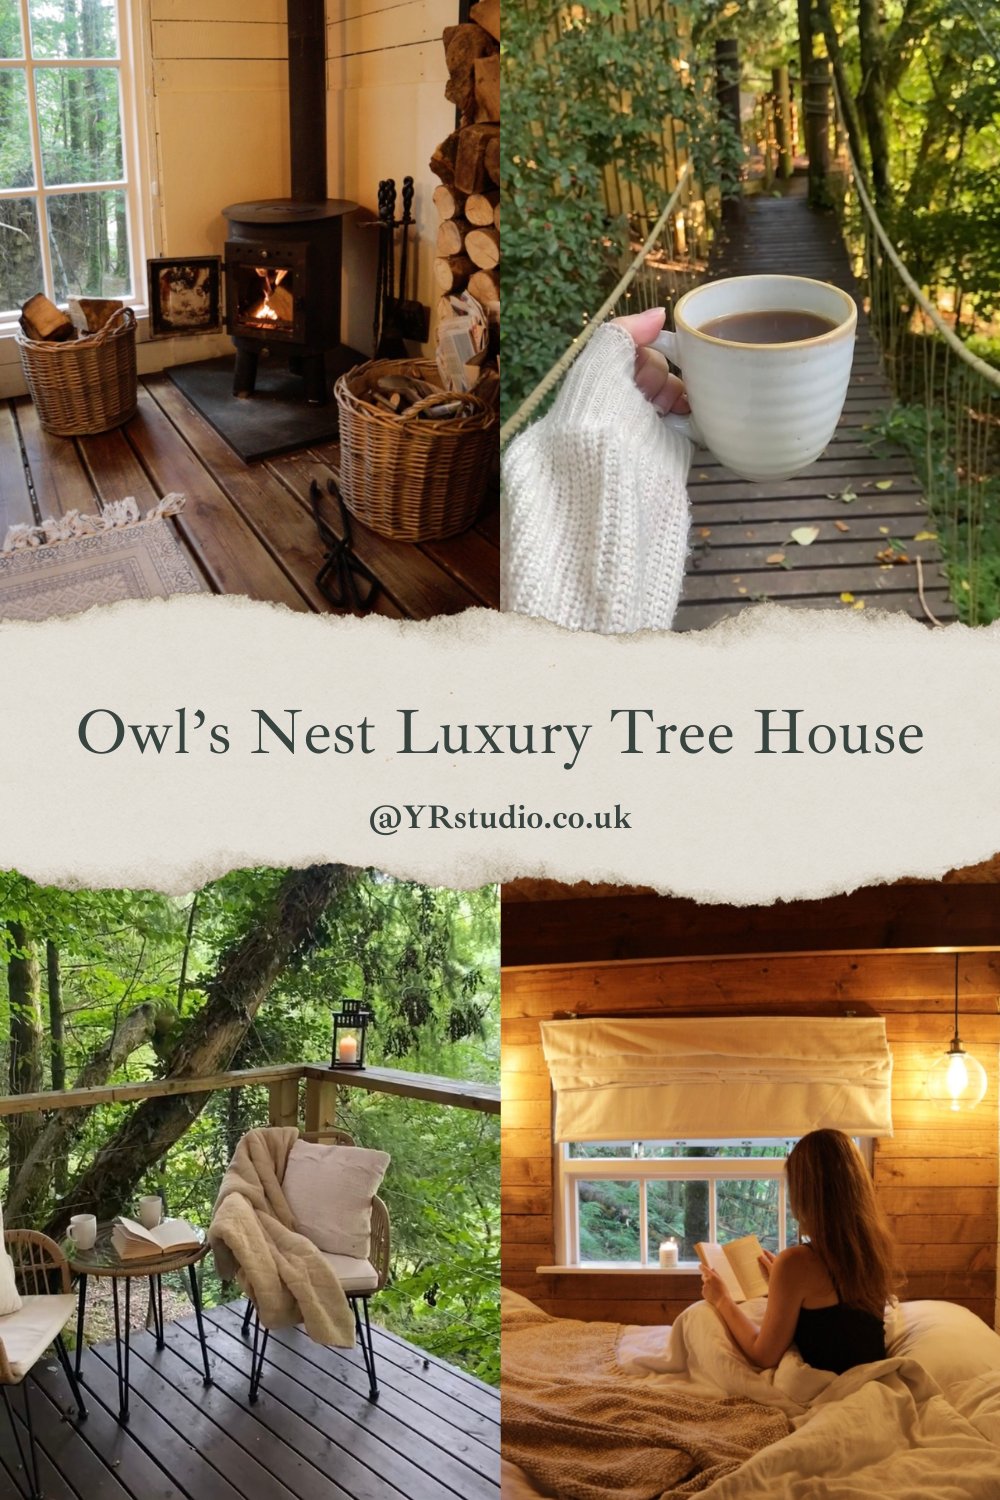 owl's nest luxury tree house in Wales, AirBNB stay